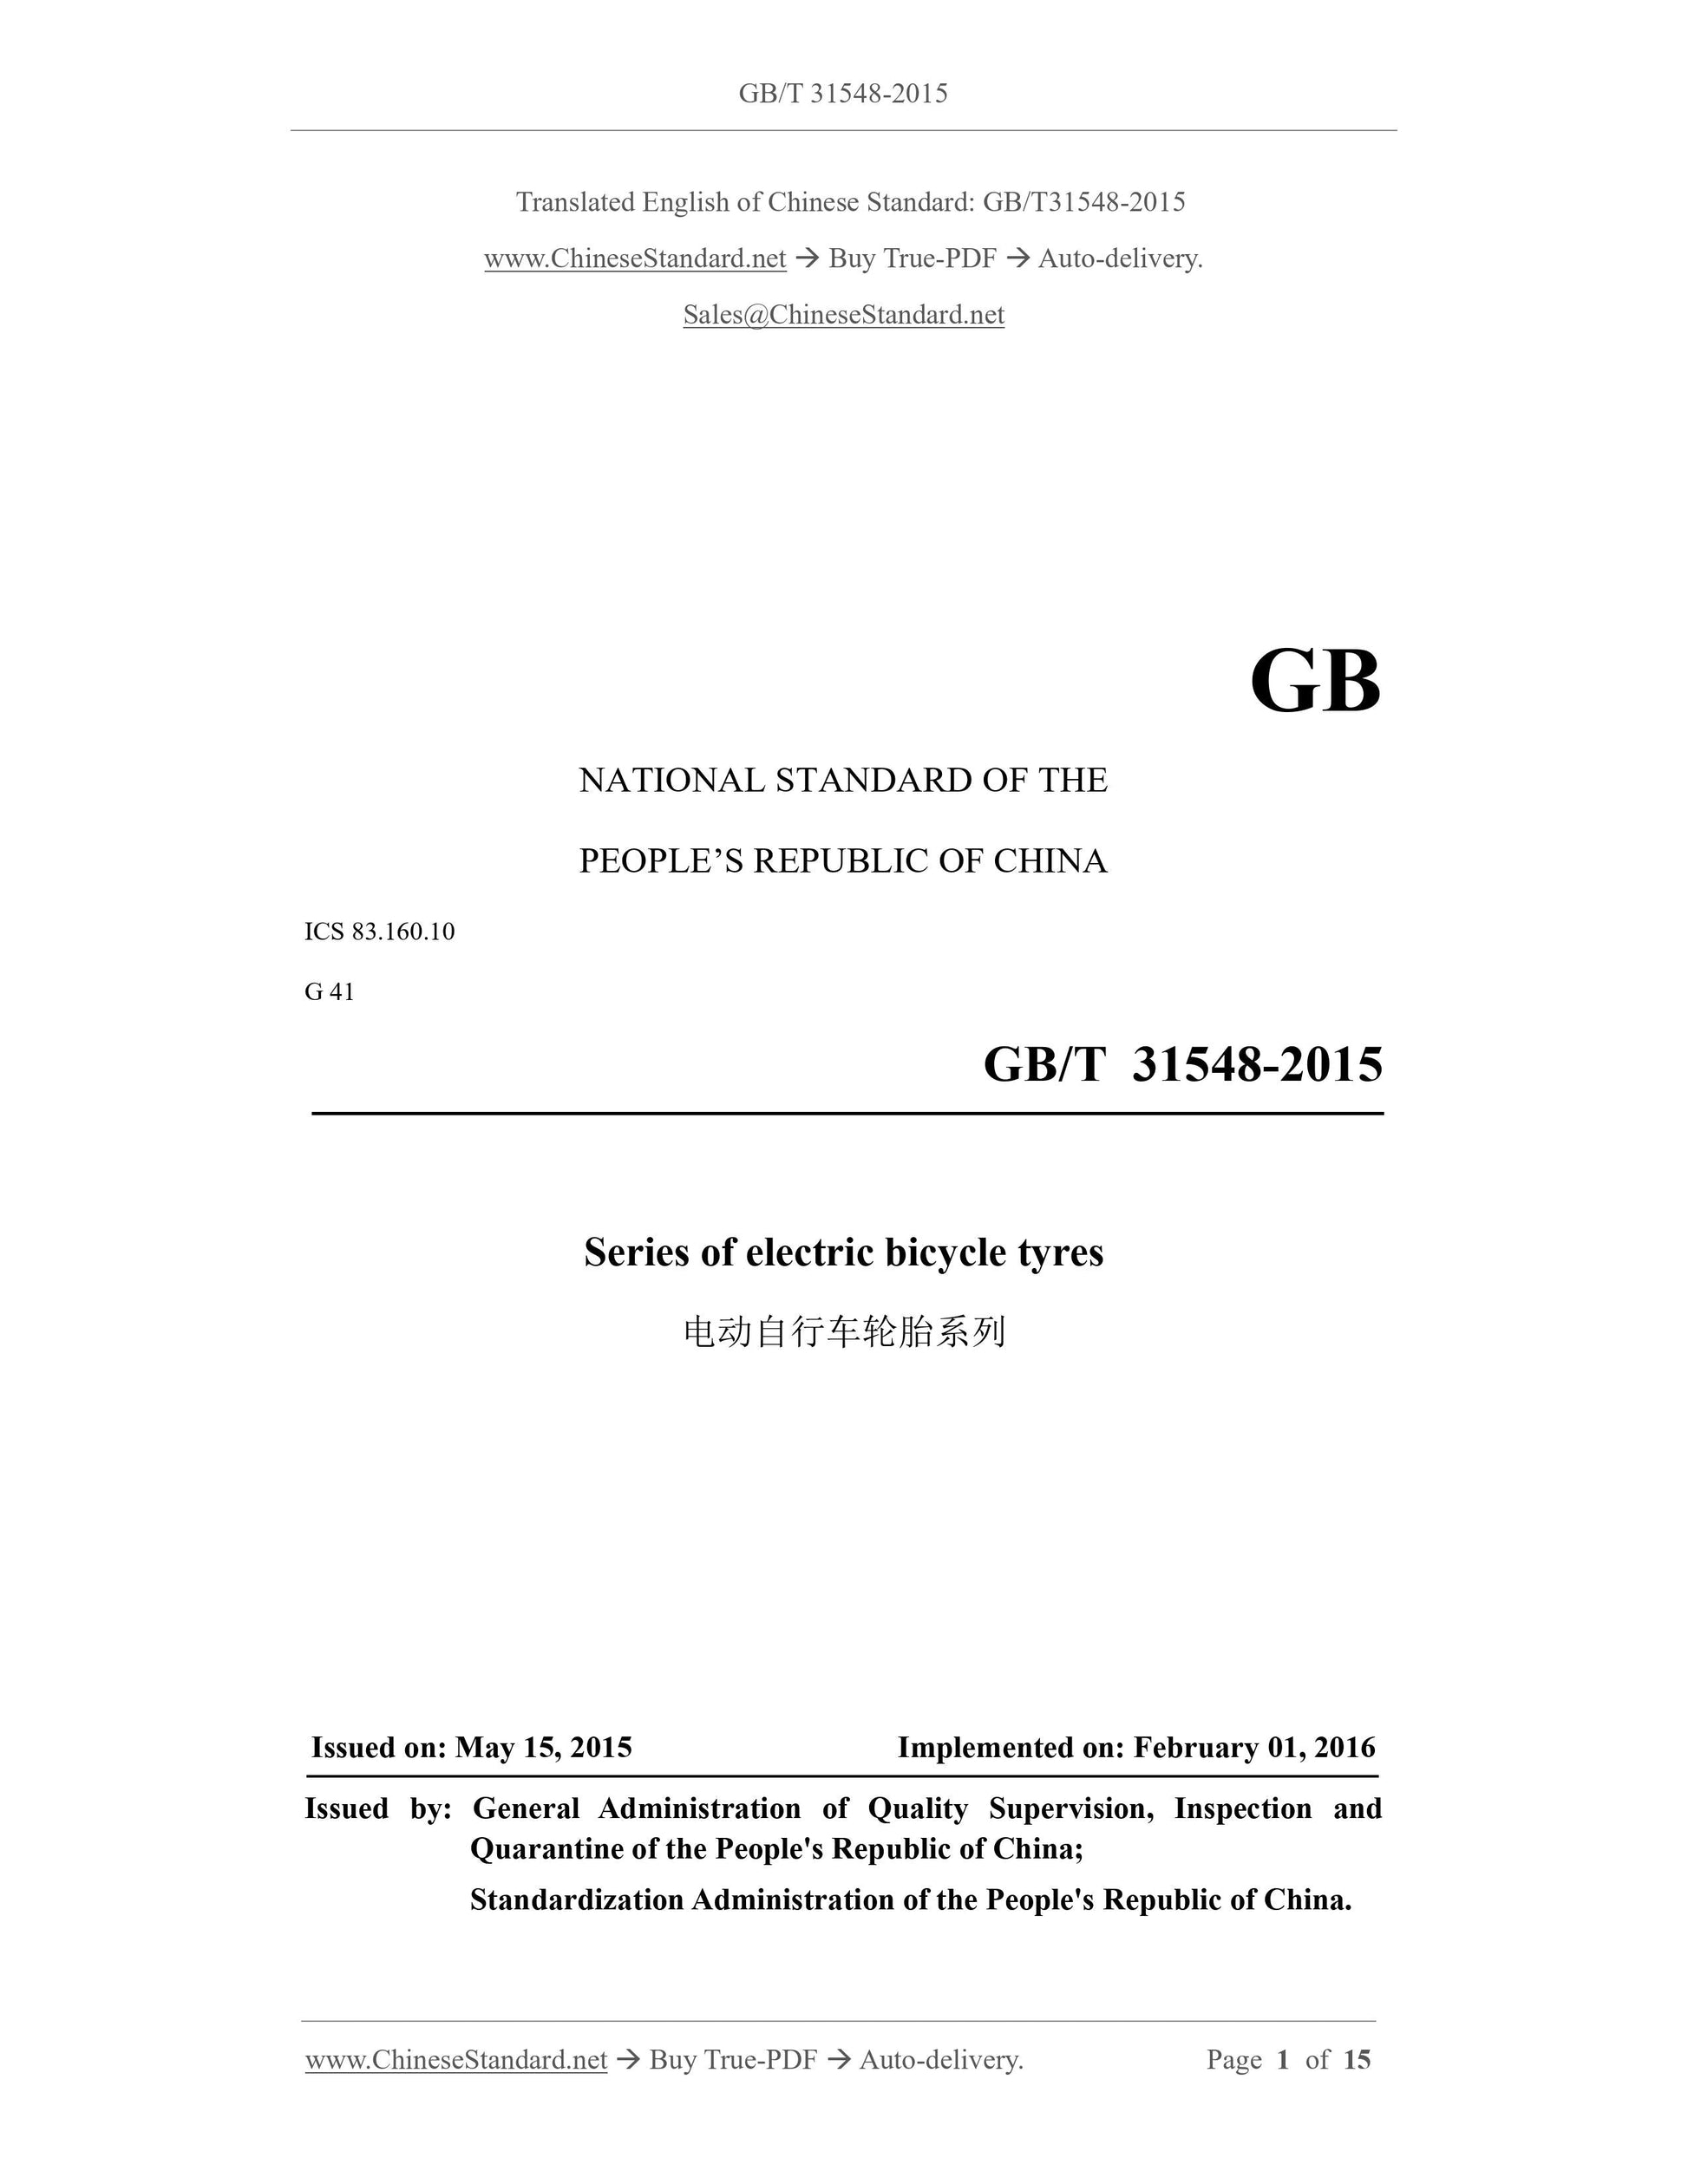 GB/T 31548-2015 Page 1